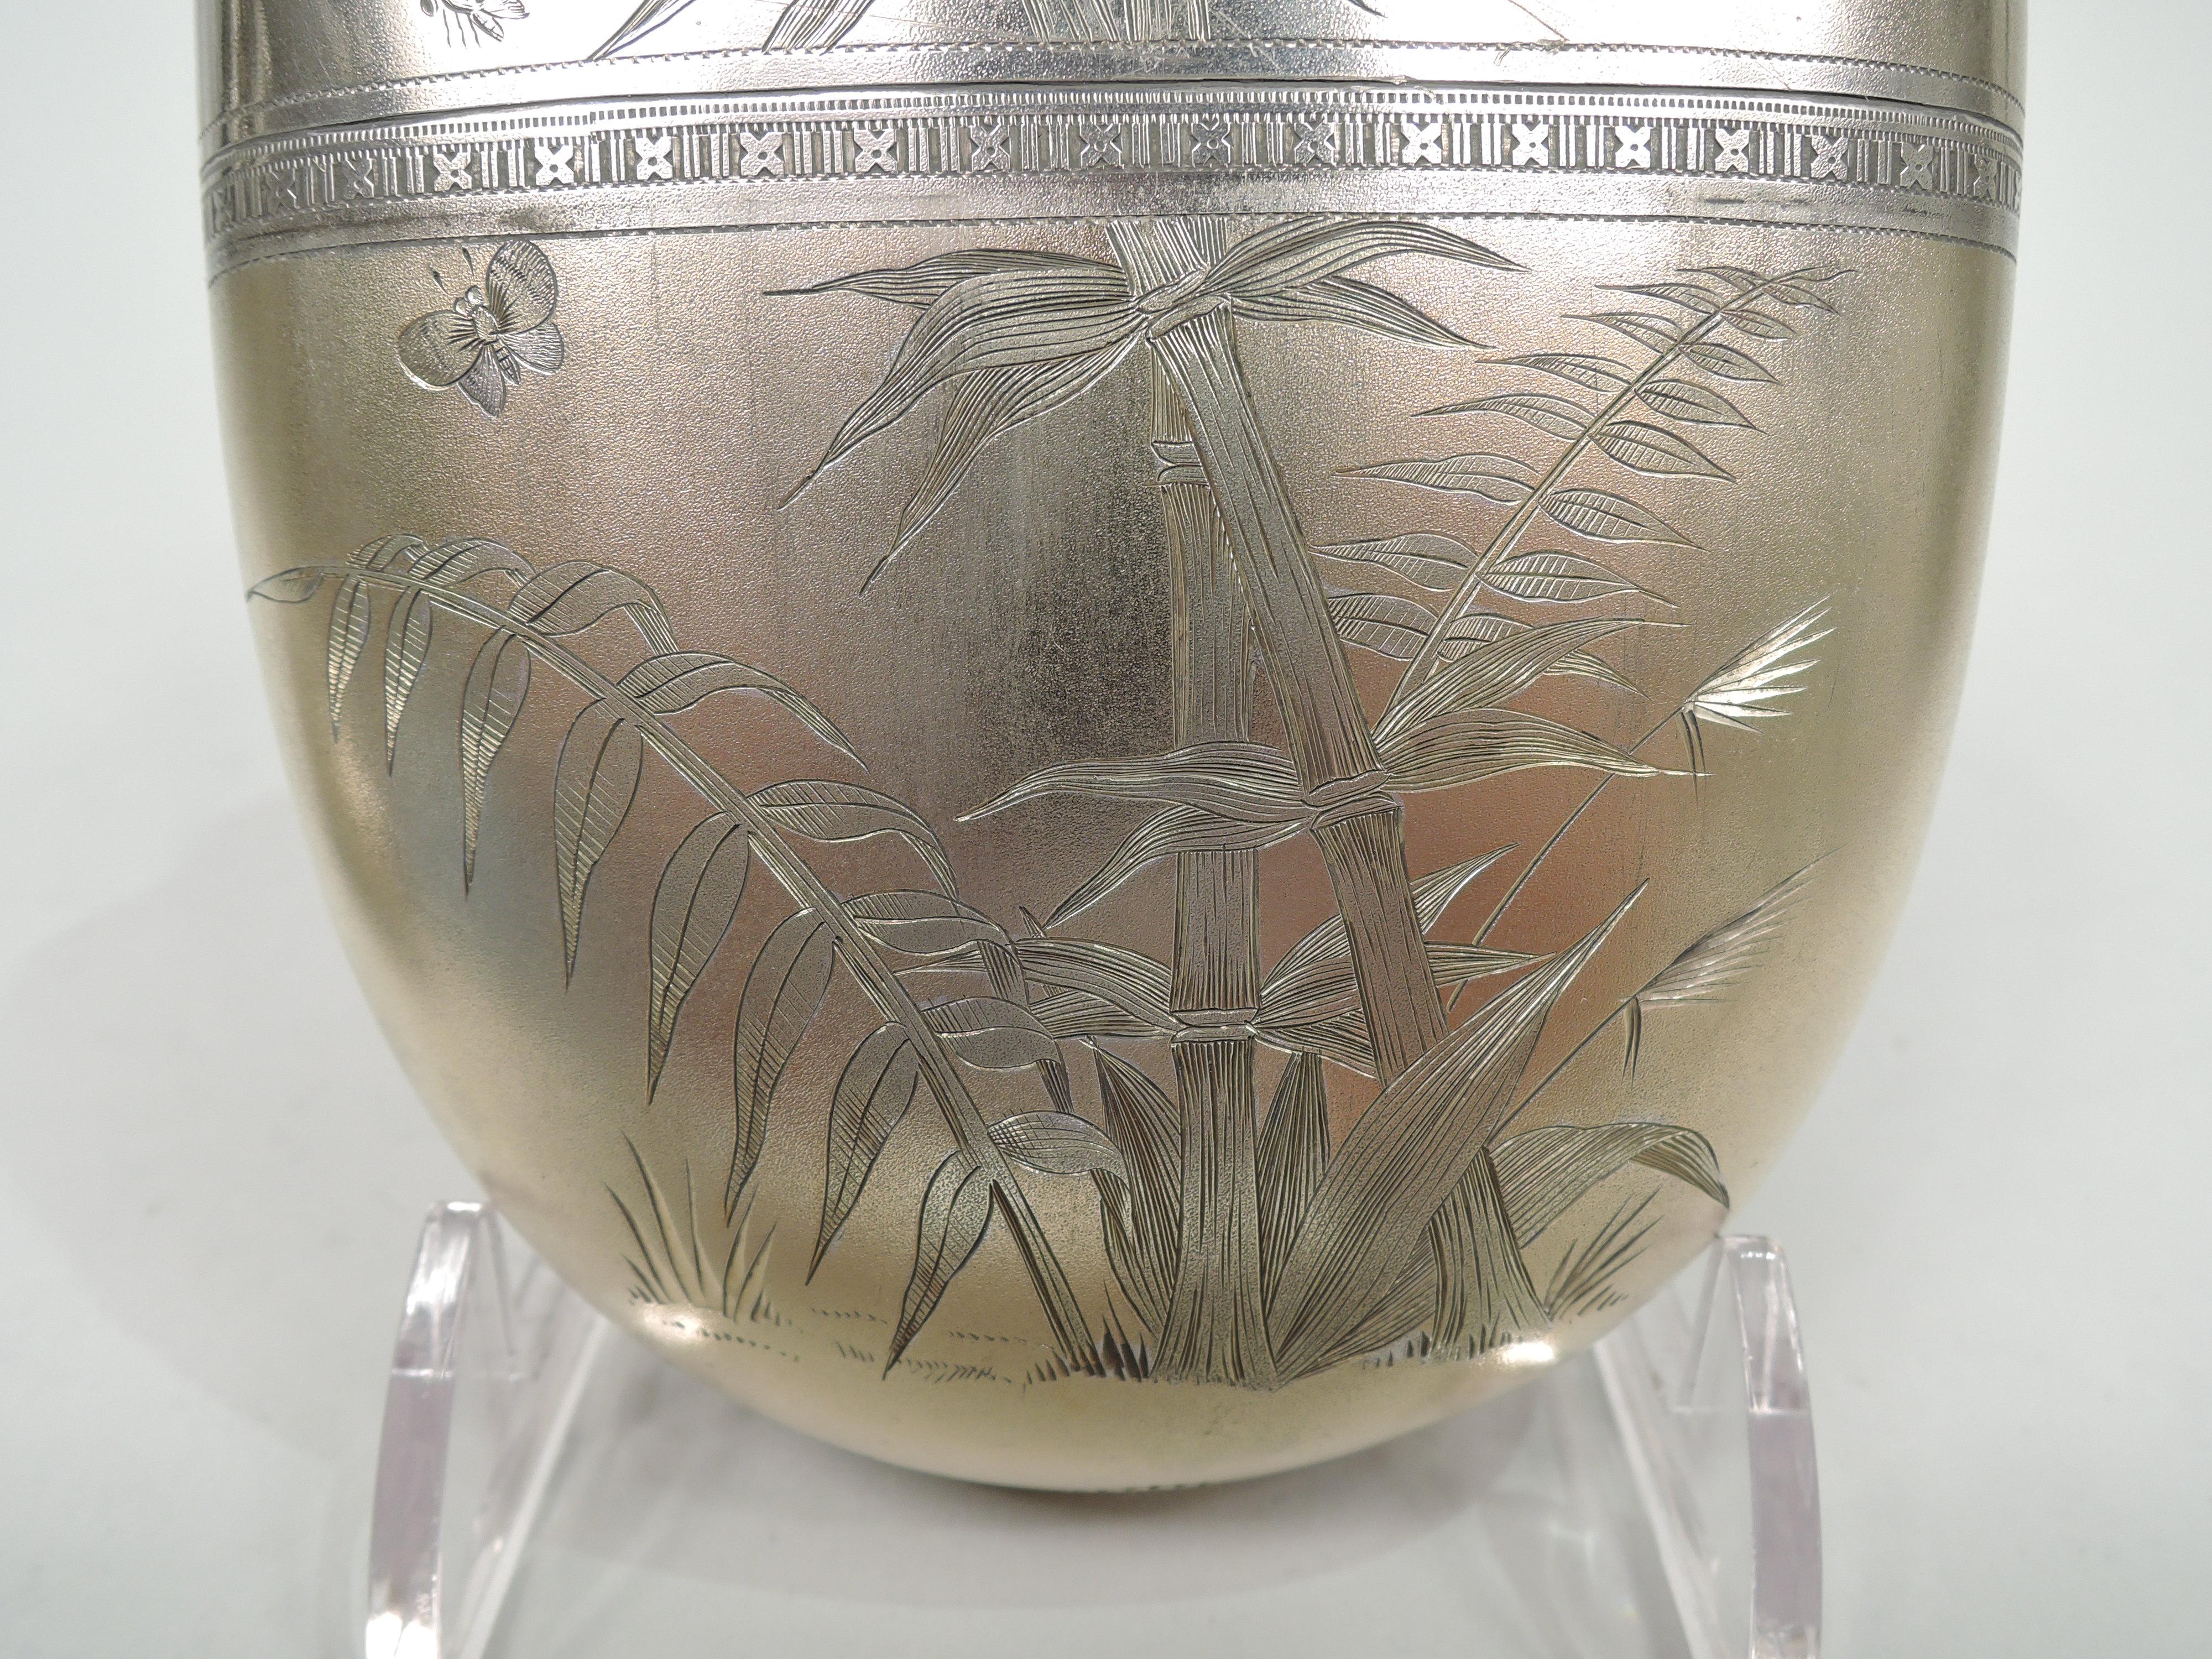 Gorgeous Gorham Japonesque Sterling Silver Flask with Cranes & Bamboo For Sale 2